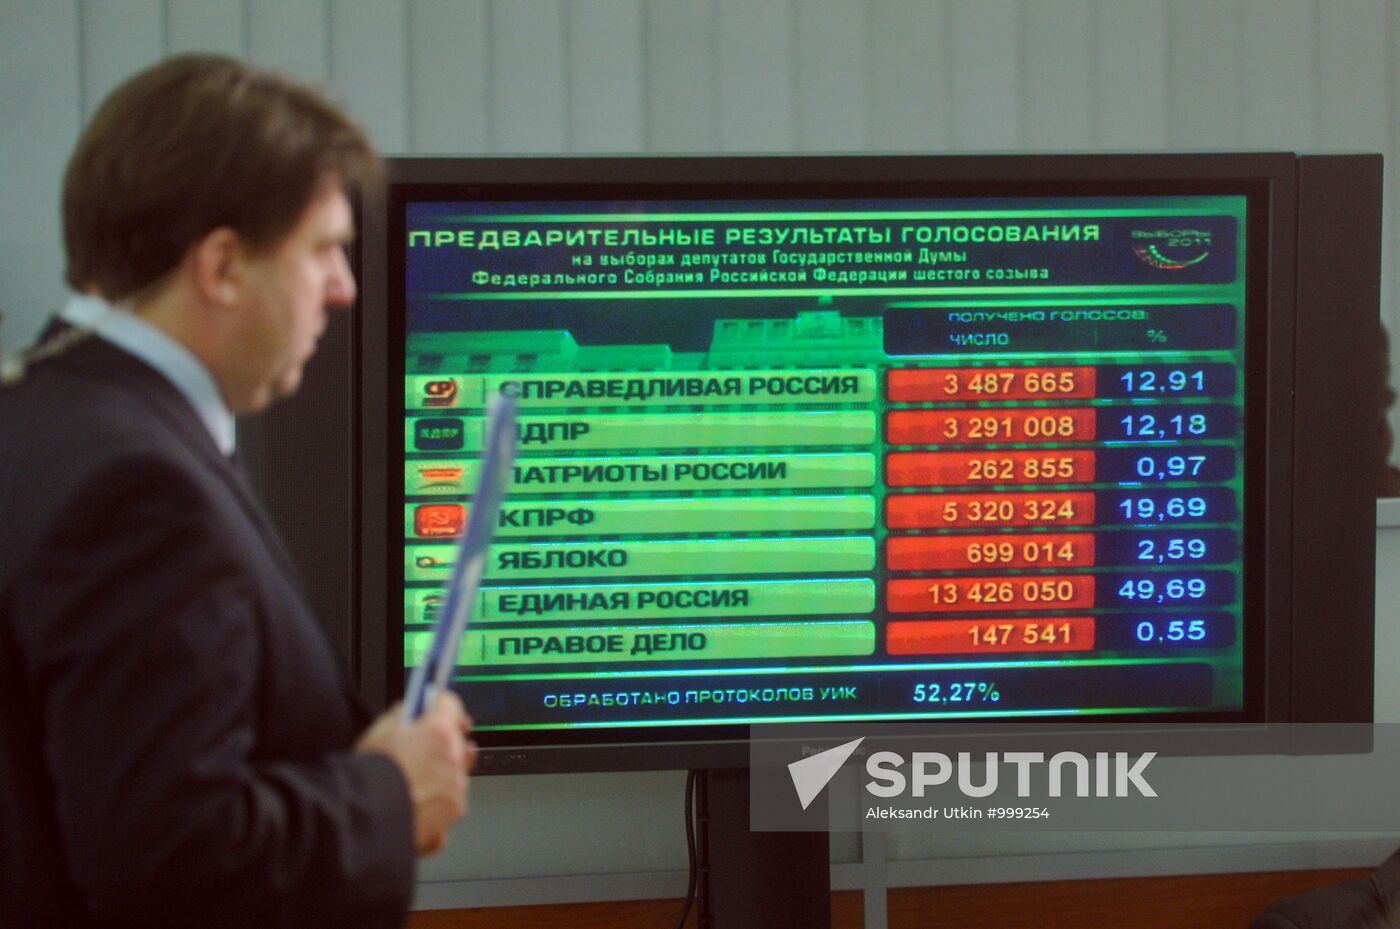 Preliminary results of State Duma elections